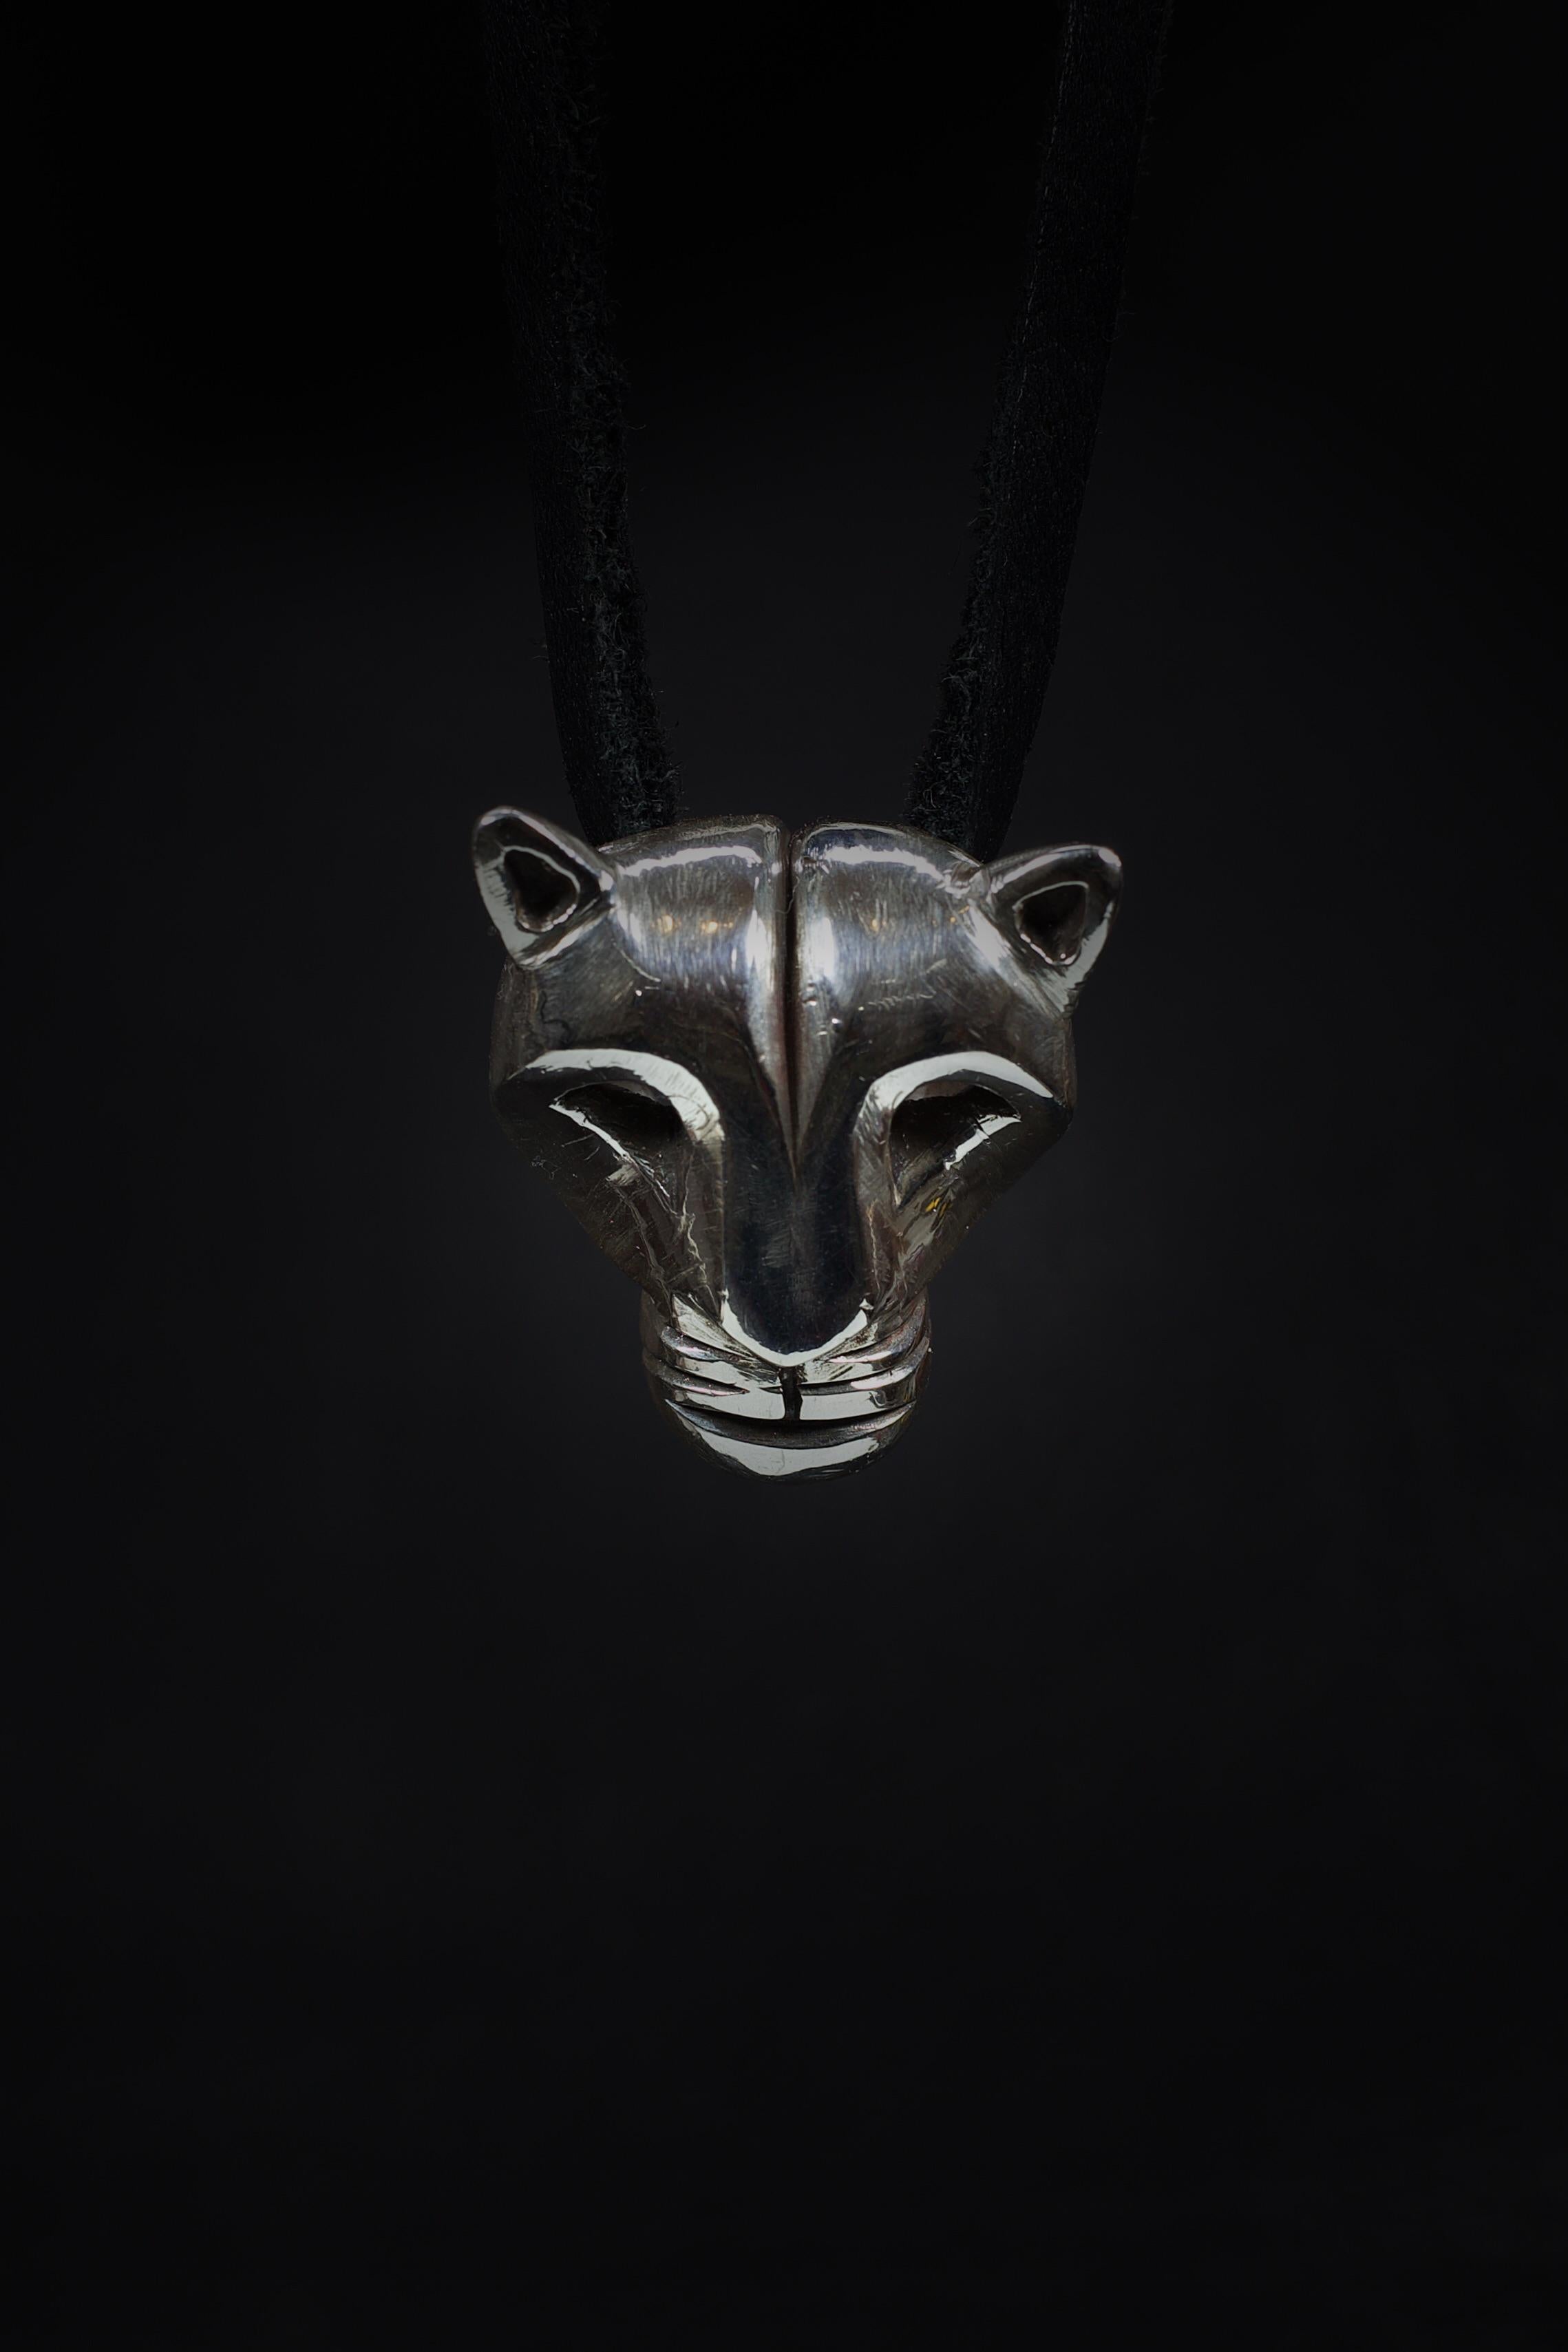 The Mountain Lion pendant by Ken Fury is a striking piece of wearable art that captures the grace and power of the elusive creature of the Southwest. Hand-carved and cast, the pendant features sharp lines and intricate details that evoke the fierce